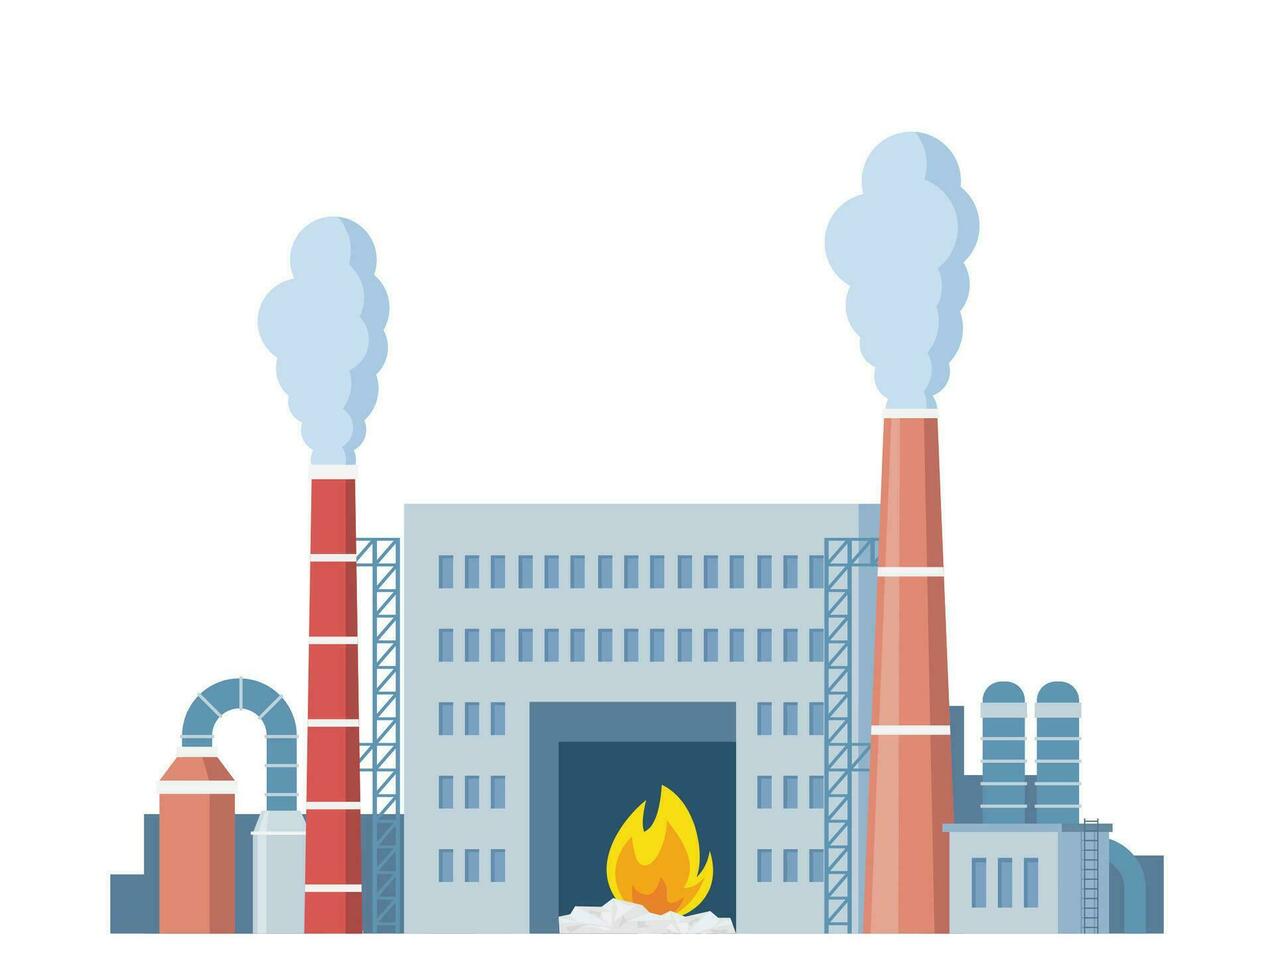 Incineration plant. Waste factory. Trash transportation and recycling. Rubbish disposal. Smoke pipes. Nature pollution. Industrial production building. Vector illustration.